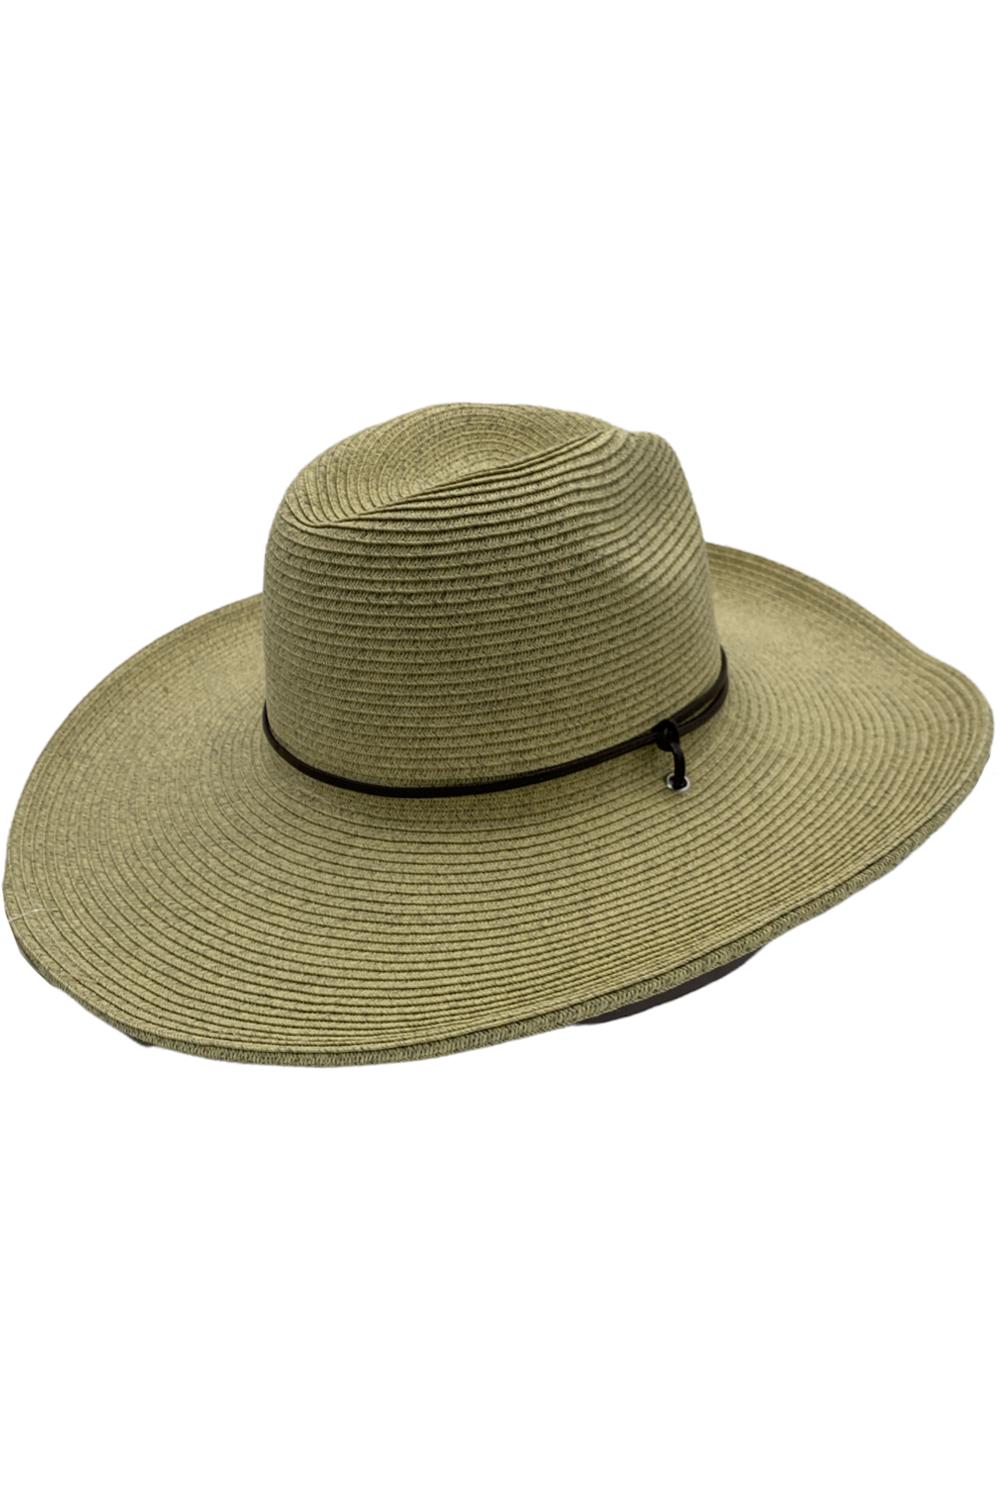 San Diego Hat Co. Fedora Sun Hat with Flat Brim and UPF 50 